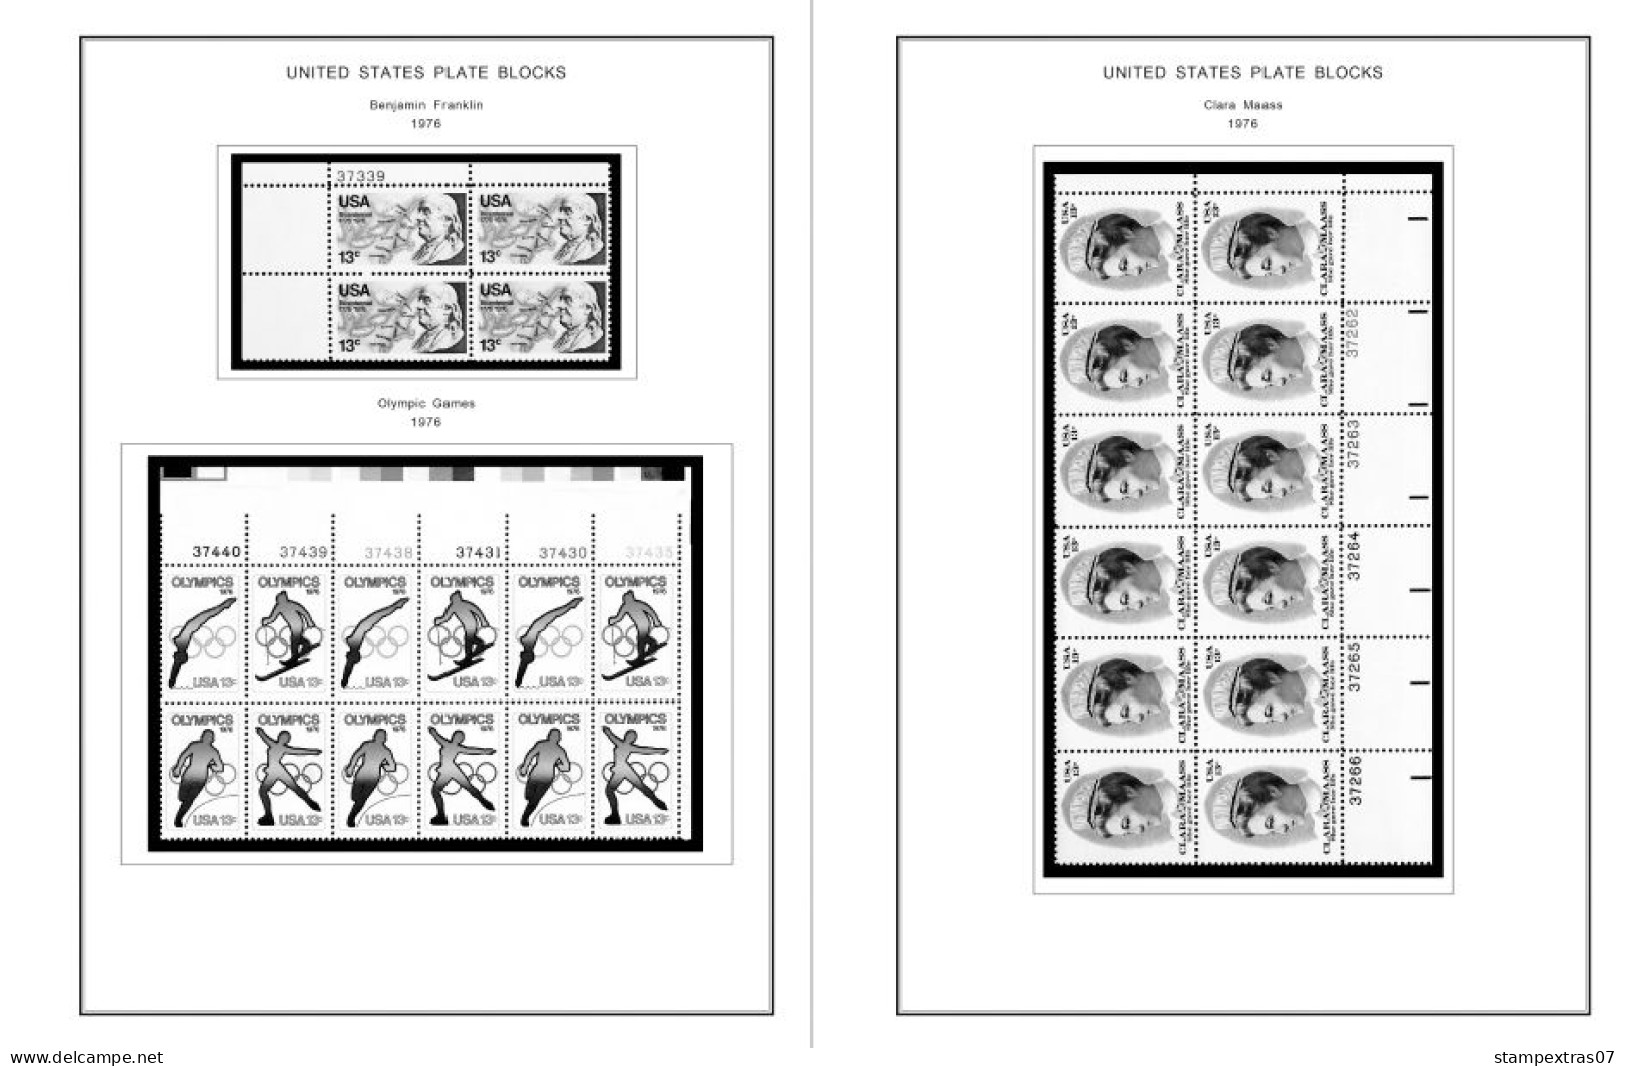 US 1970-1979 PLATE BLOCKS STAMP ALBUM PAGES (112 b&w illustrated pages)